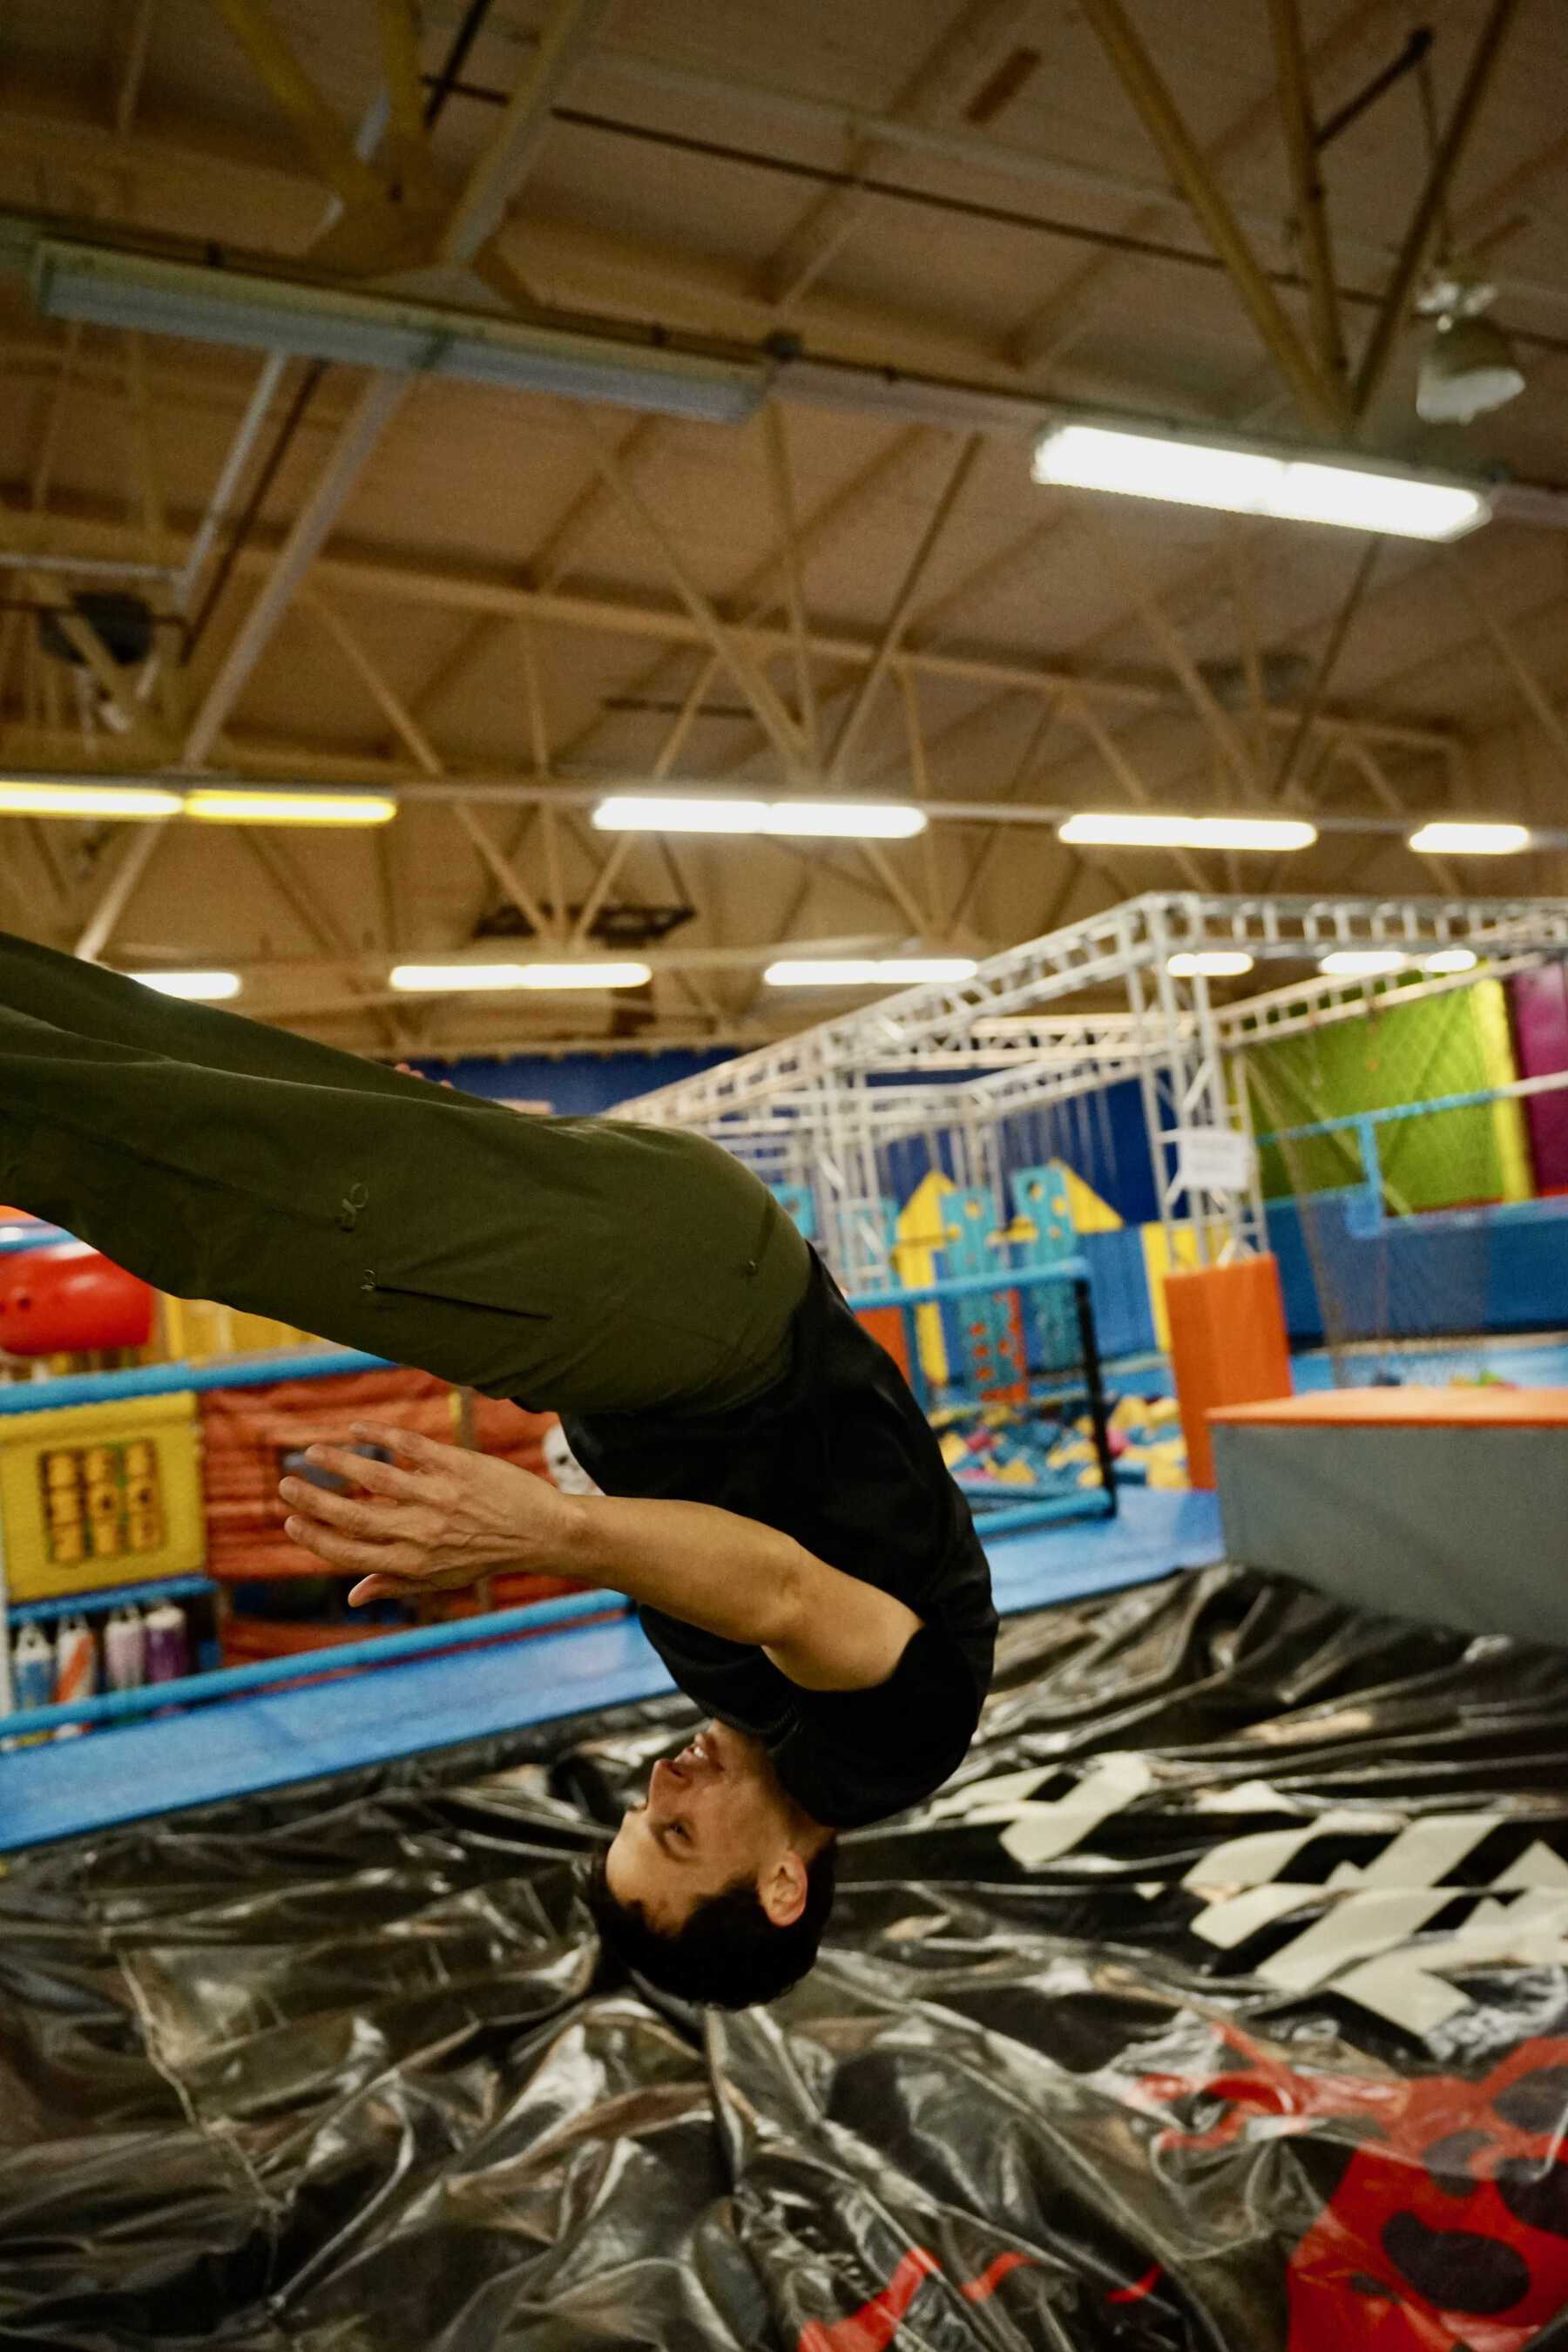 Man upside down in air over soft mat